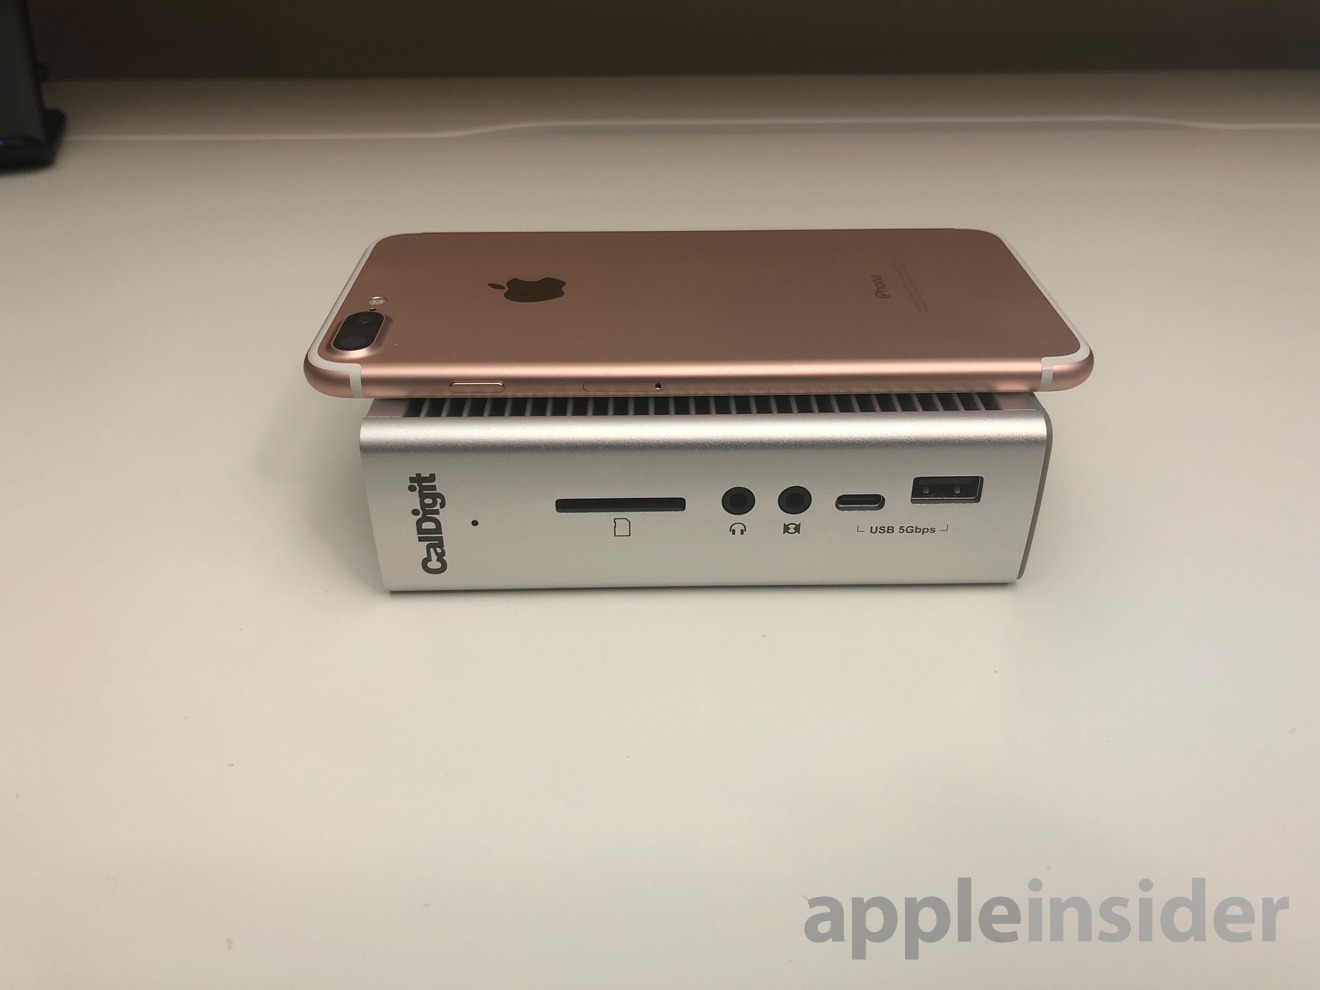 CalDigit Thunderbolt Station 3 Plus, with iPhone 7 Plus for scale